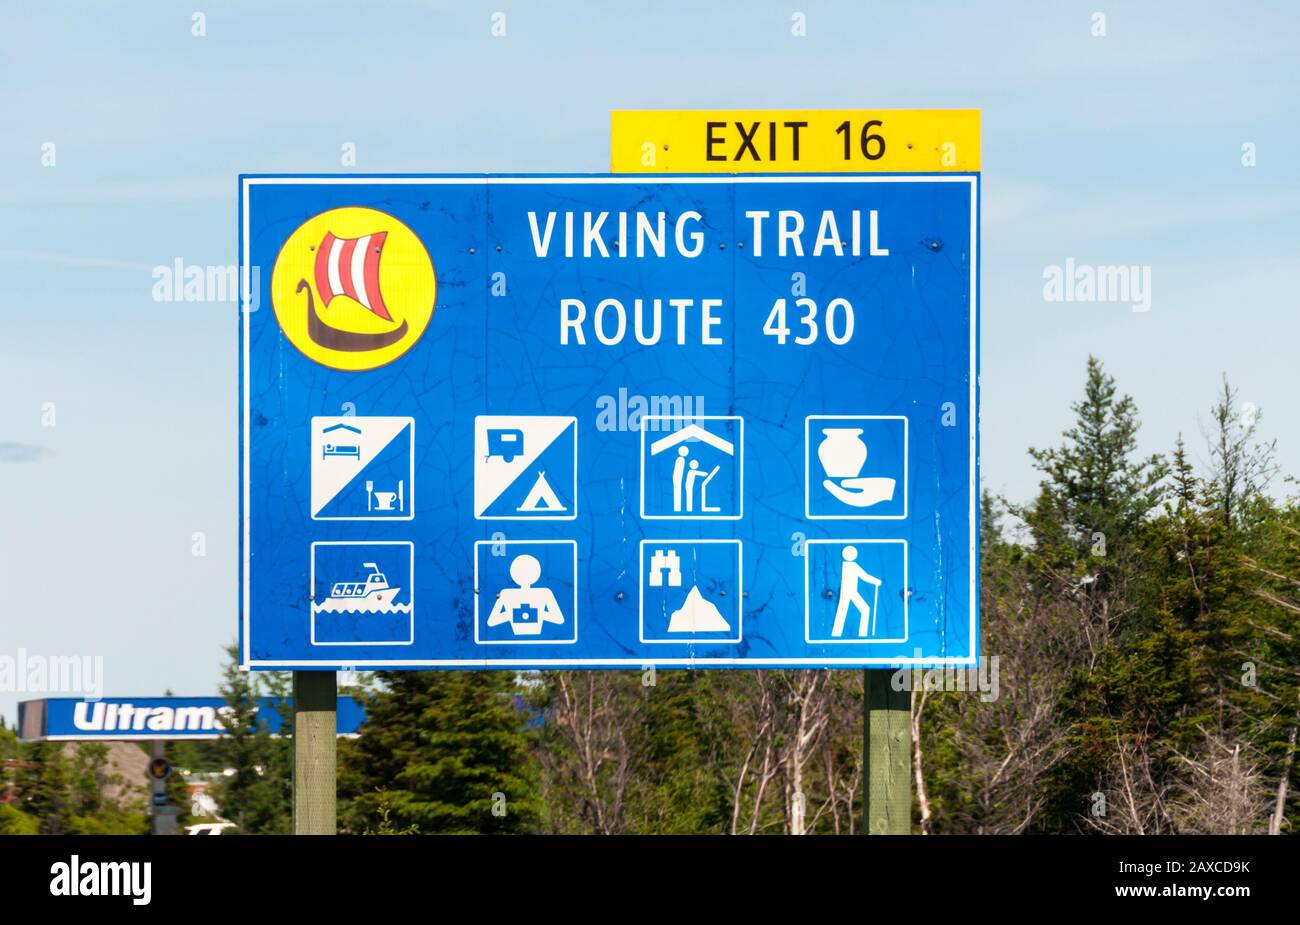 Road sign for Rote 430, the Viking Trail, in Corner Brook, Newfoundland.  With icons for various tourist attractions. Stock Photo